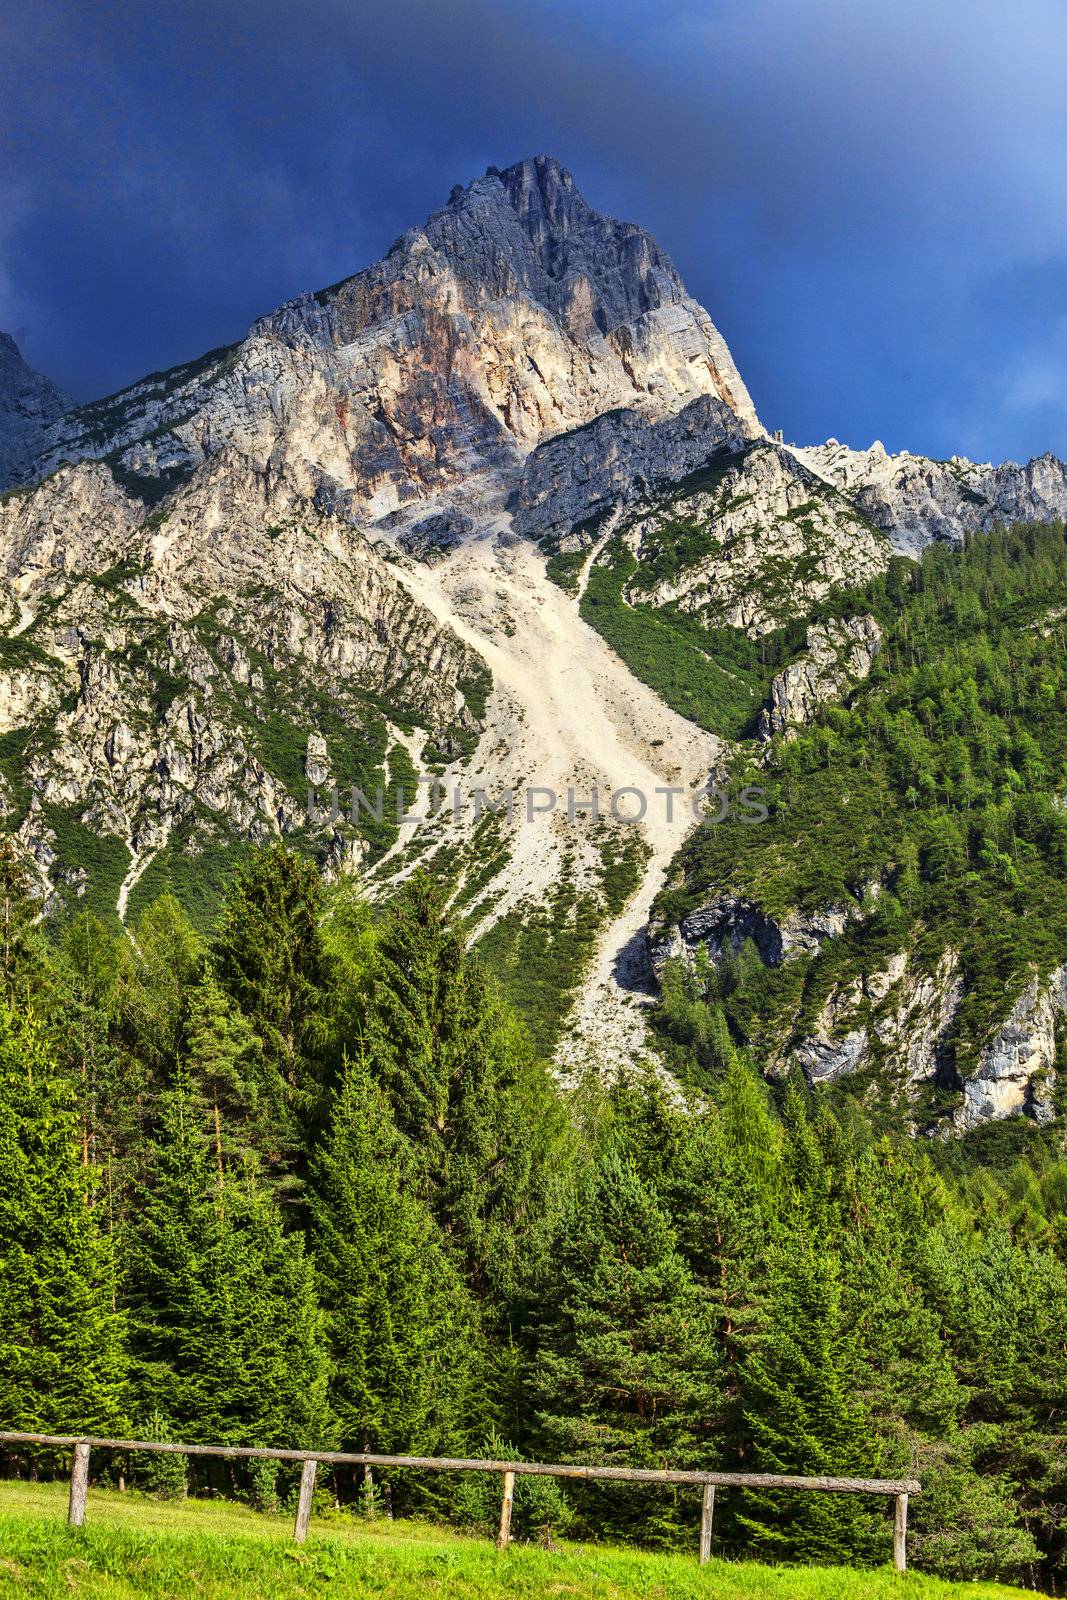 Beautiful image of a fresh green forest at the base of a rocky peak in Dolomites Mountains, Italy.